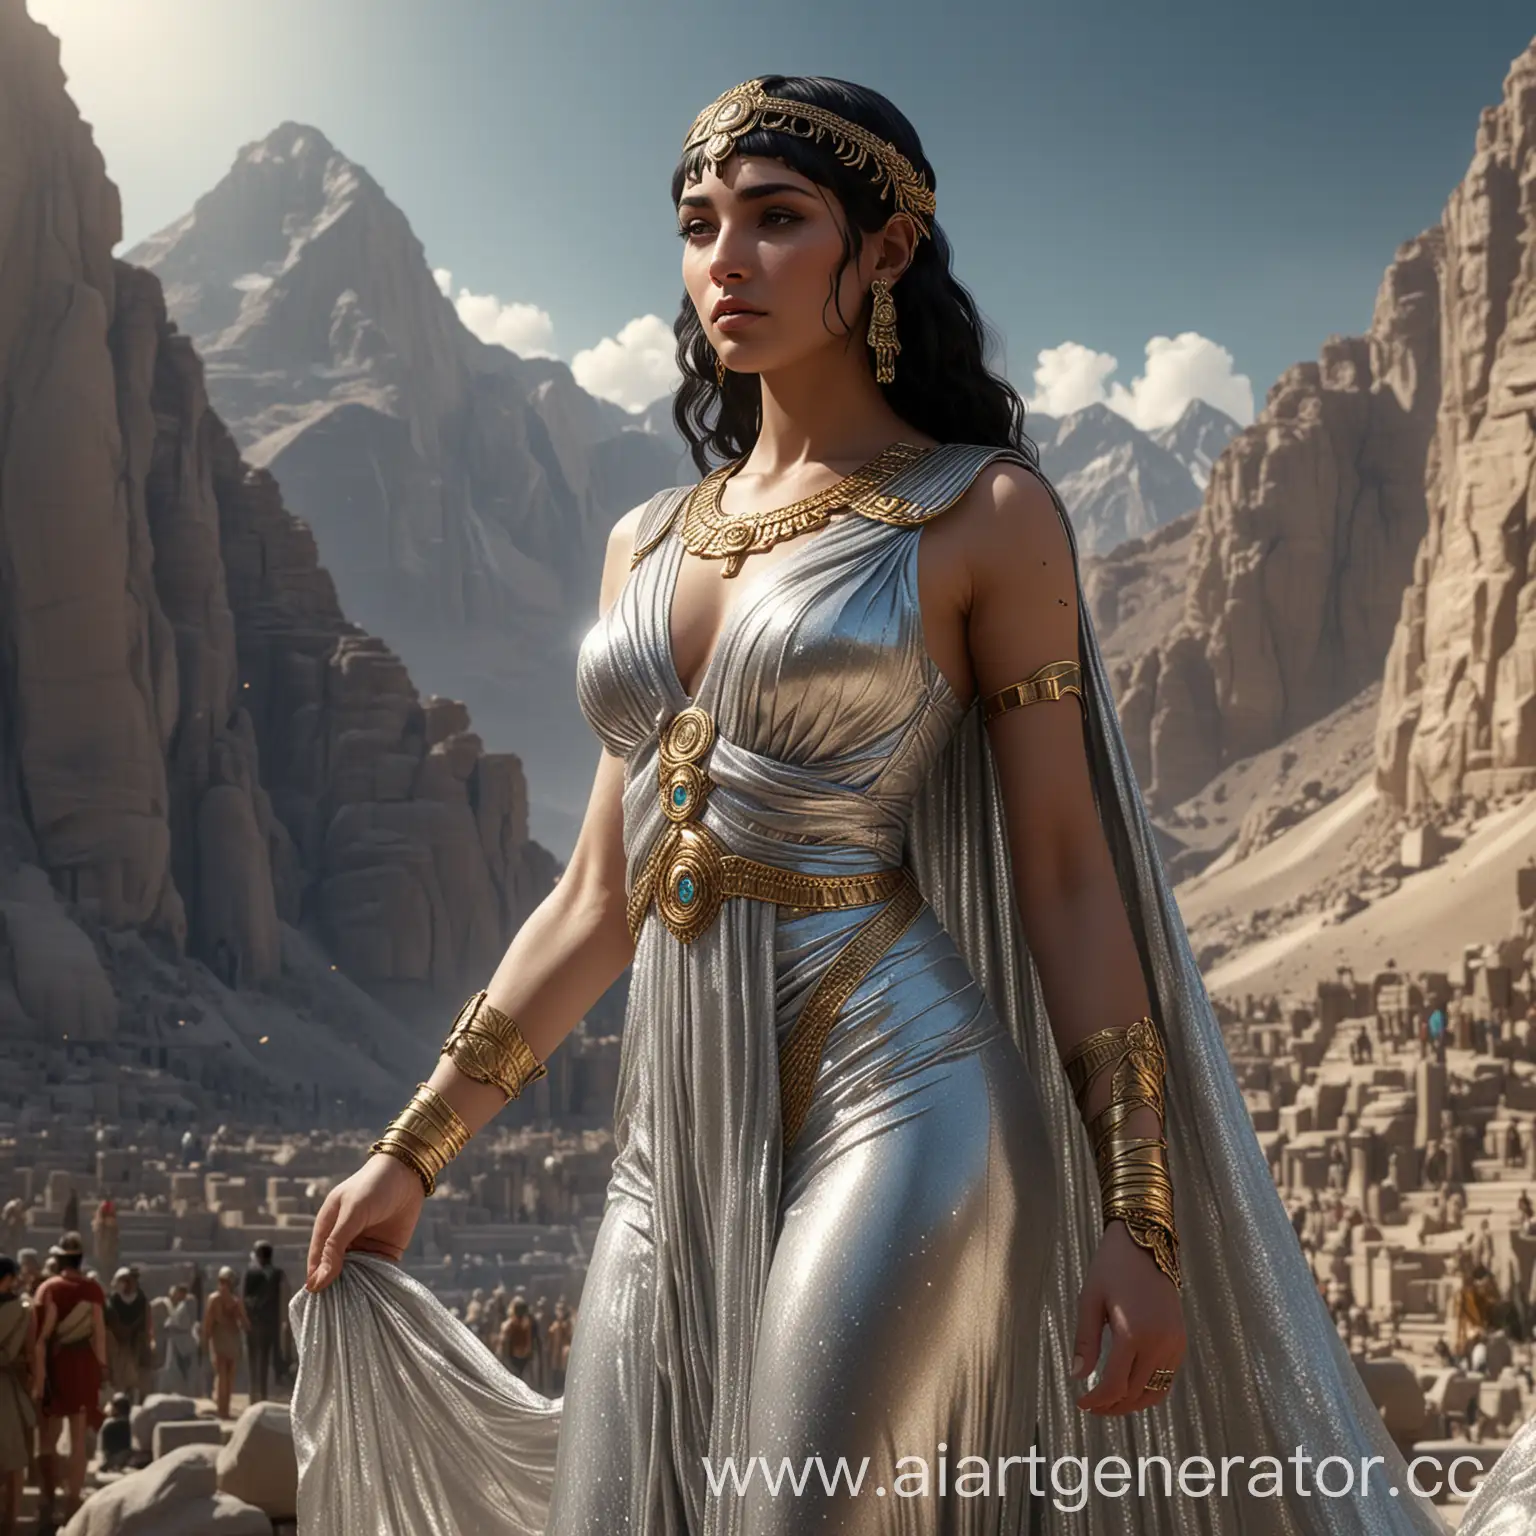 Full body, picture cleopatra draped in a shimmering silver gown, amidst the splendor of Mount Olympus, the divine realm witnessing the forbidden beauty

Sharp focus, hyper-detailed, 4k, Photograph taken with a 35mm lens, Color image, High quality, Realistic image, high resolution, Close-up photography, Dark fantasy, Epic and majestic photography, Perfect body without deformities, Mysterious